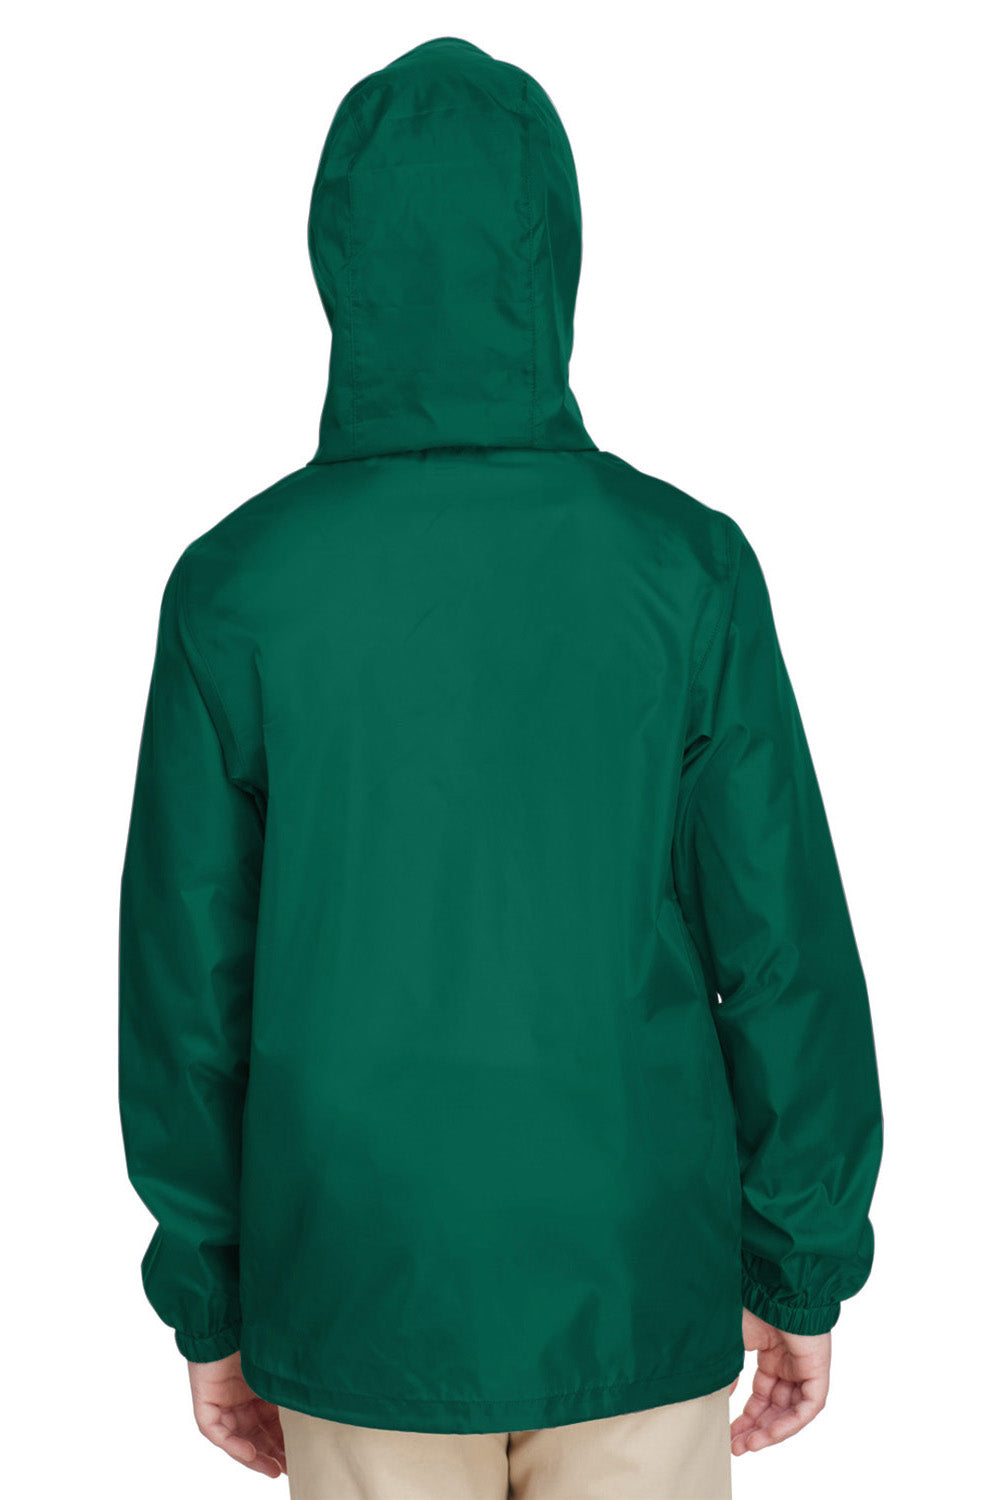 Team 365 TT73Y Youth Zone Protect Water Resistant Full Zip Hooded Jacket Forest Green Back